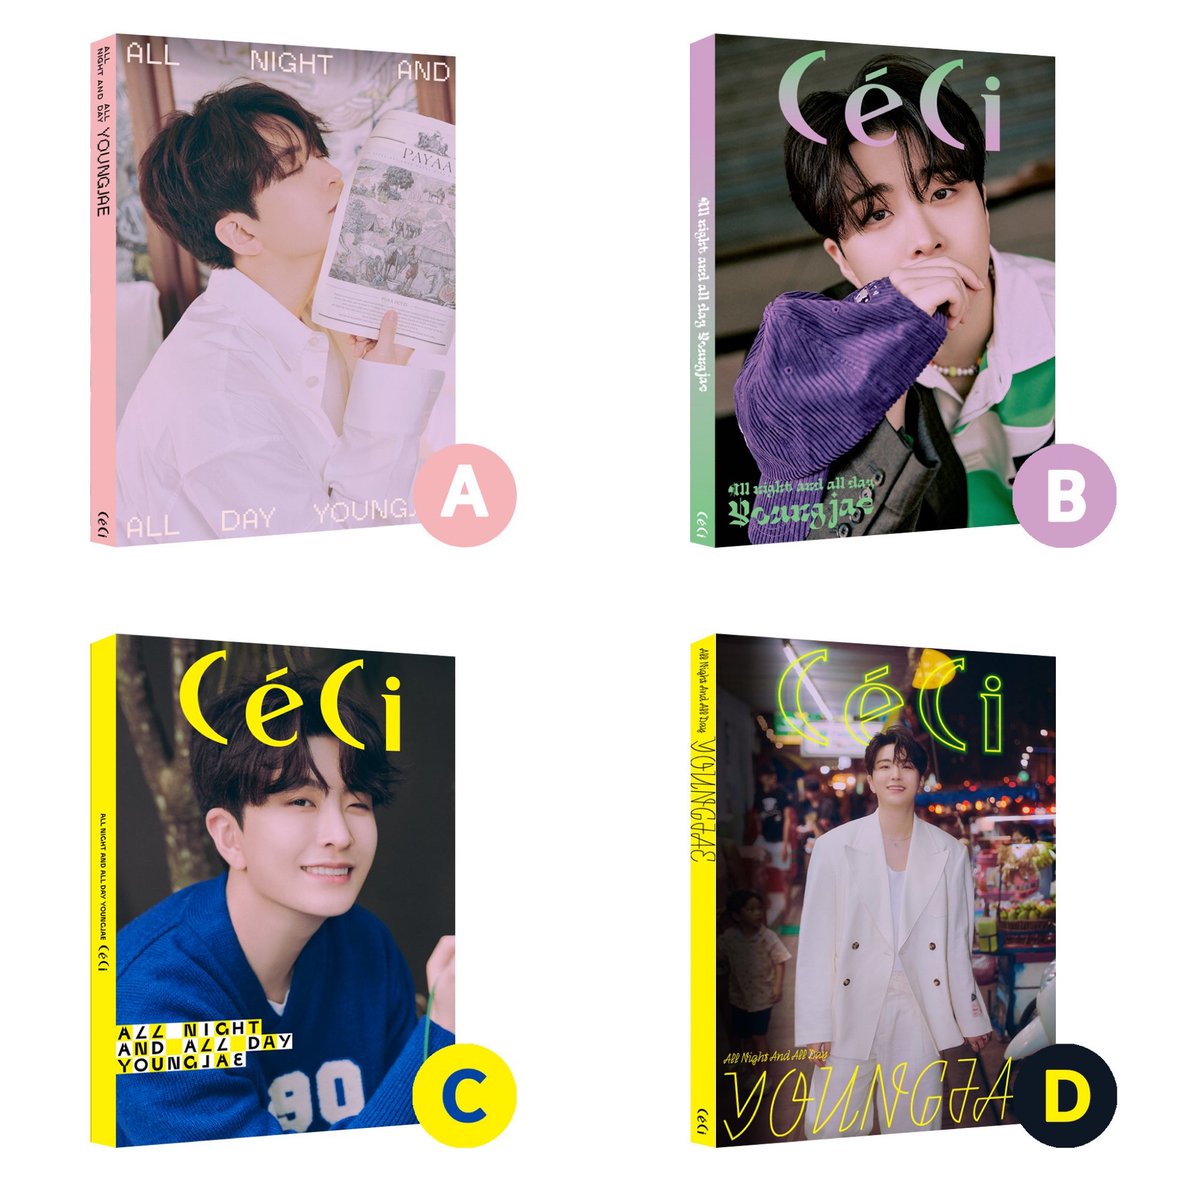 [PLZ RT] Youngjae Ceci [All Night and All Day] Photobook Group Order Open!

*Gifts: Exclusive photocard plus fanmade photocards! I will also customize pouch booklet for ver A & B!

Order here: klsoeul.com/products/video…

@GOT7 @YOUNGJAExArs  @YOUNGJAExArs #youngjae #GOT7 #grouporder